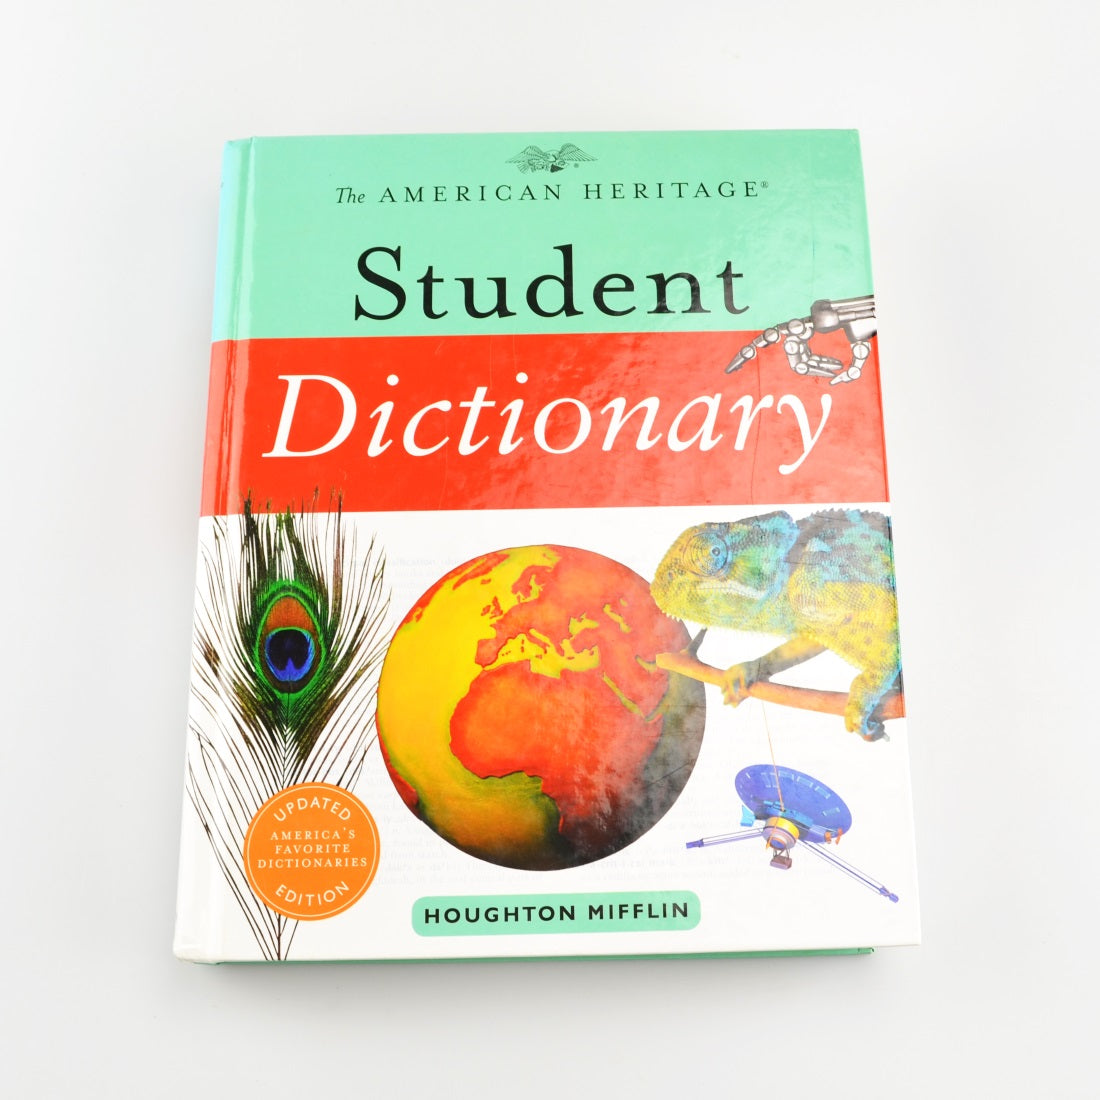 The American Heritage Student Dictionary by Houghton Mifflin